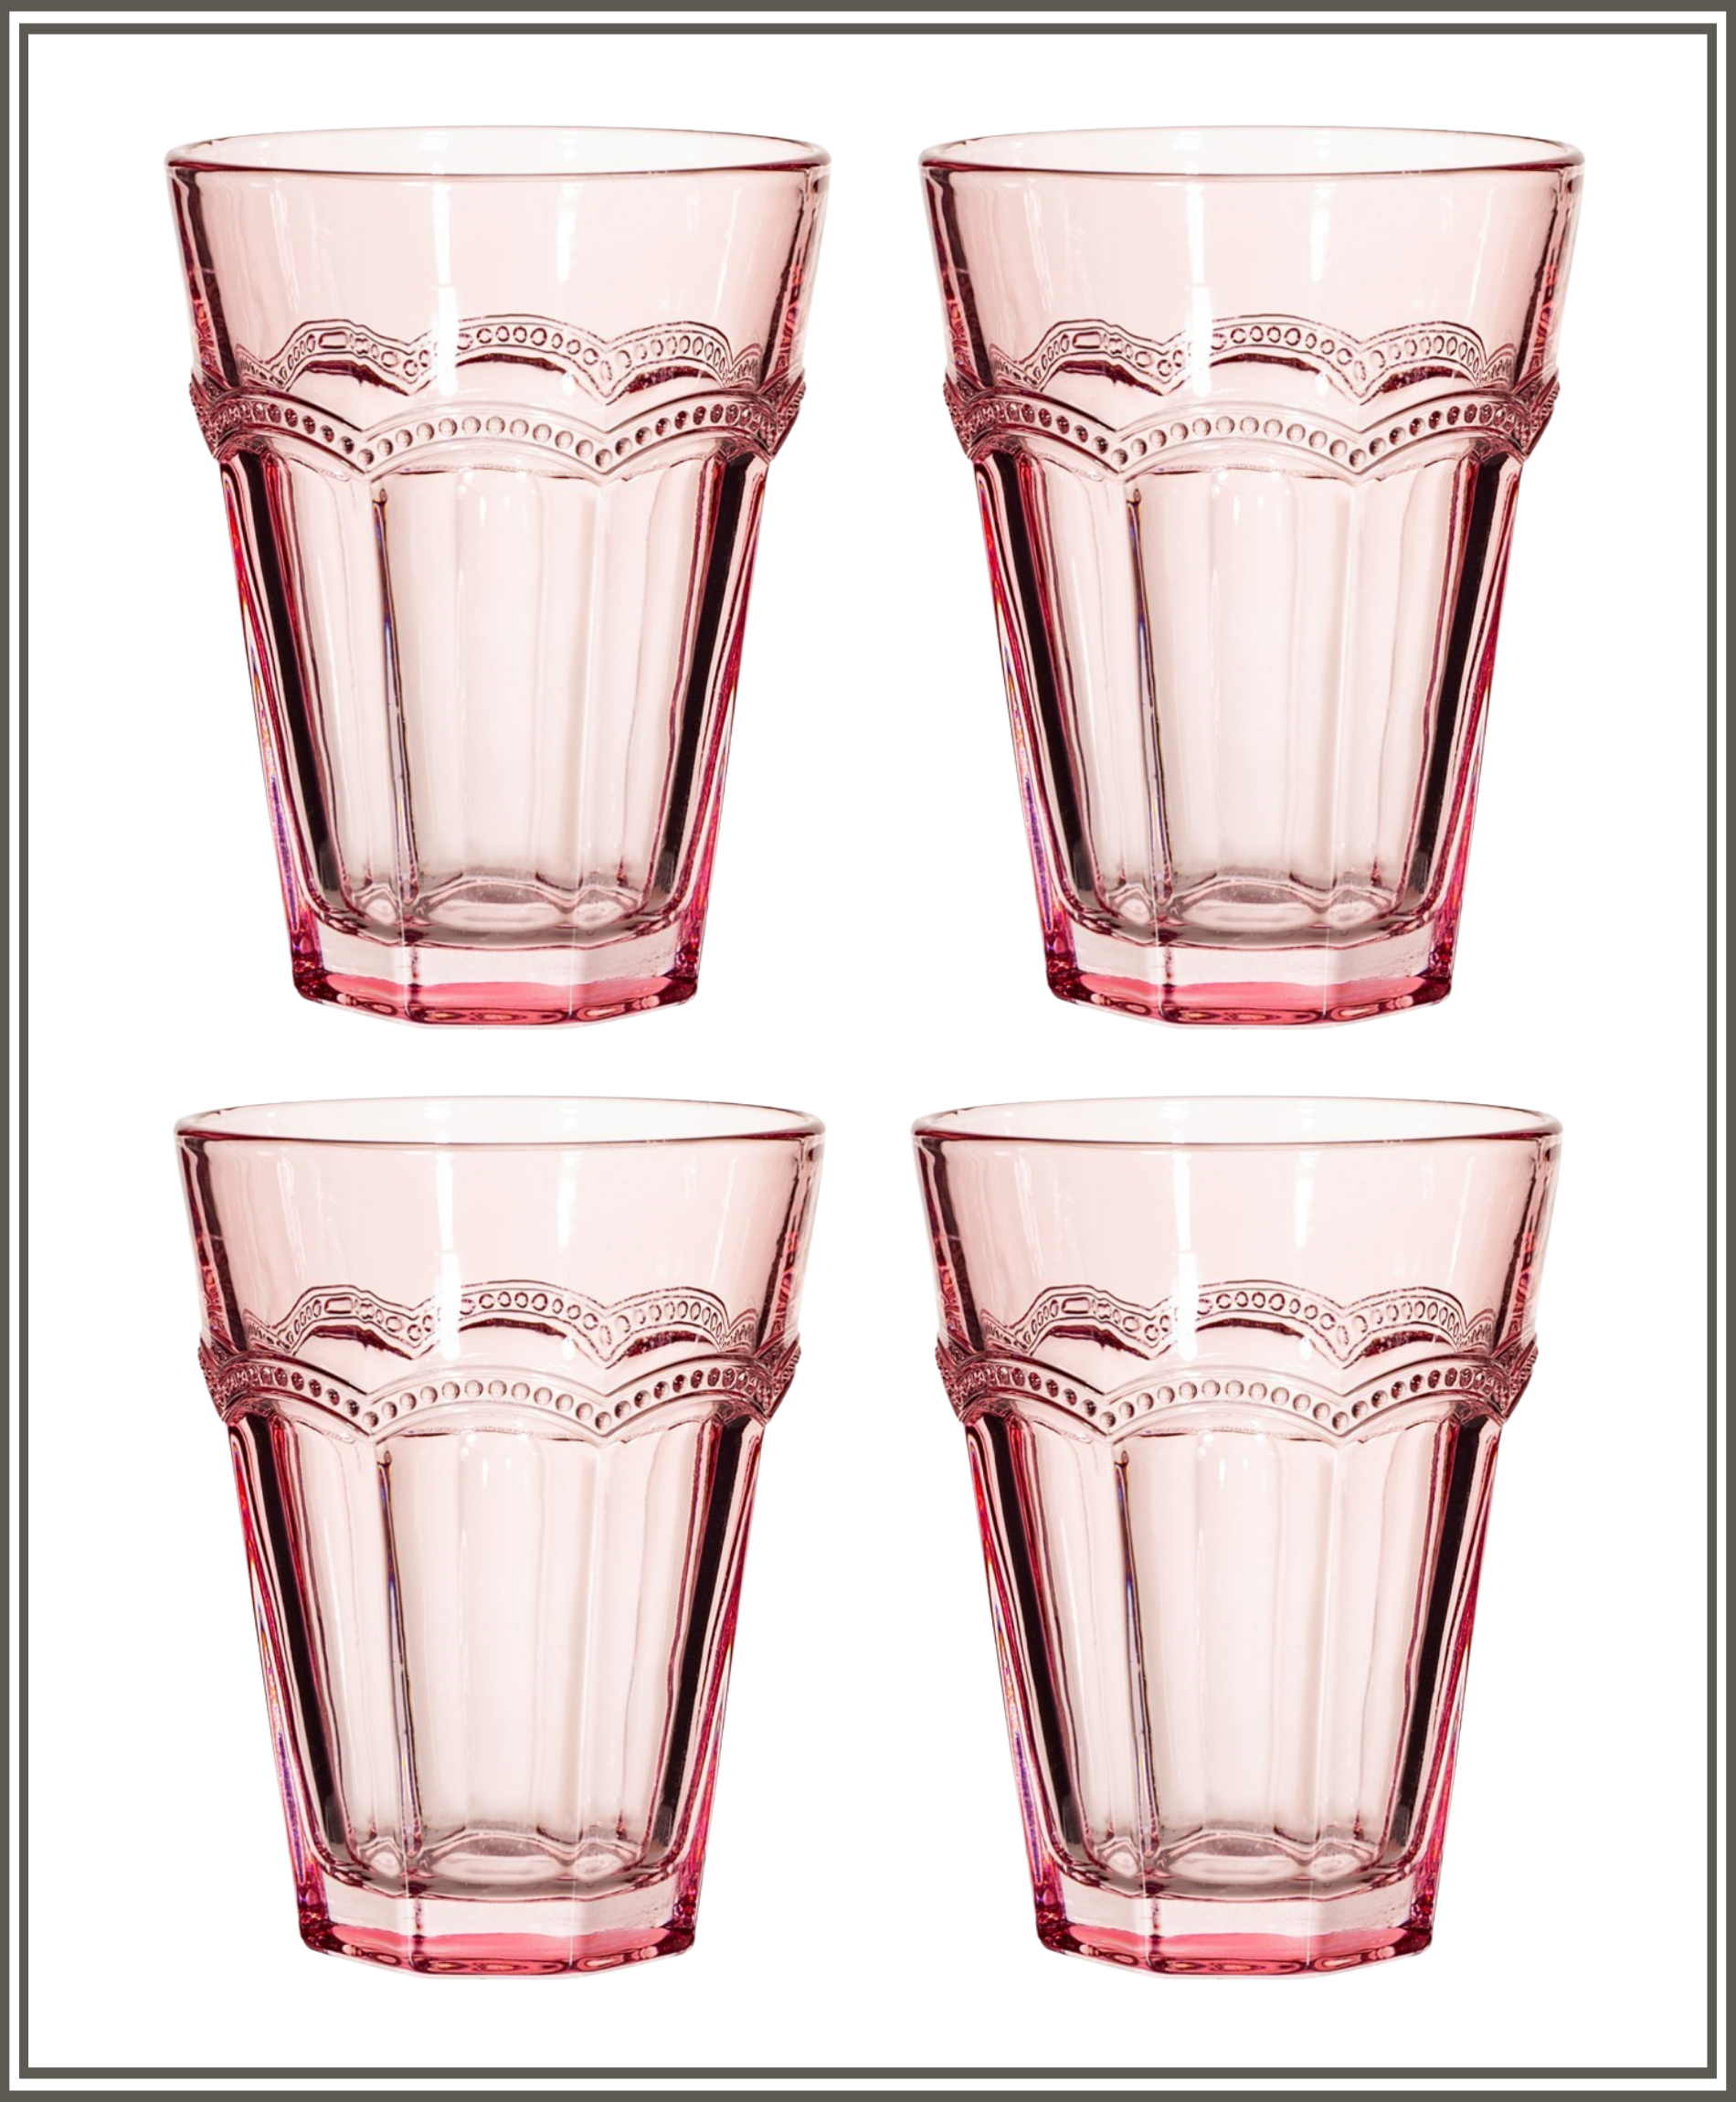 sass-and-belle-clarisse-drinking-glass-pink-set-of-4